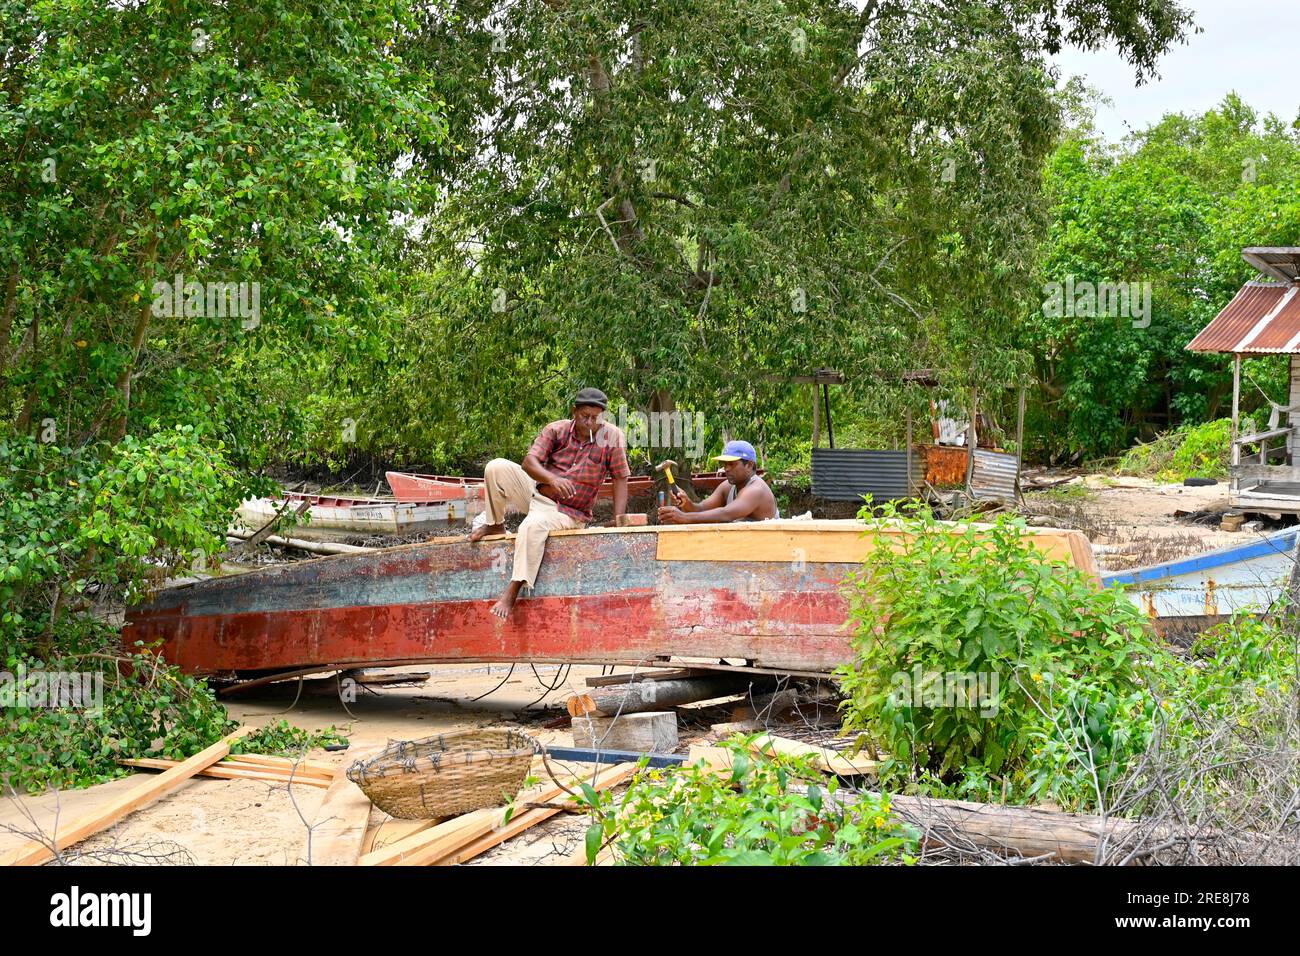 Near a river and surrounded by greenery two carpenters of village Ponoma in Suriname renew the bottom of a wooden boat Stock Photo